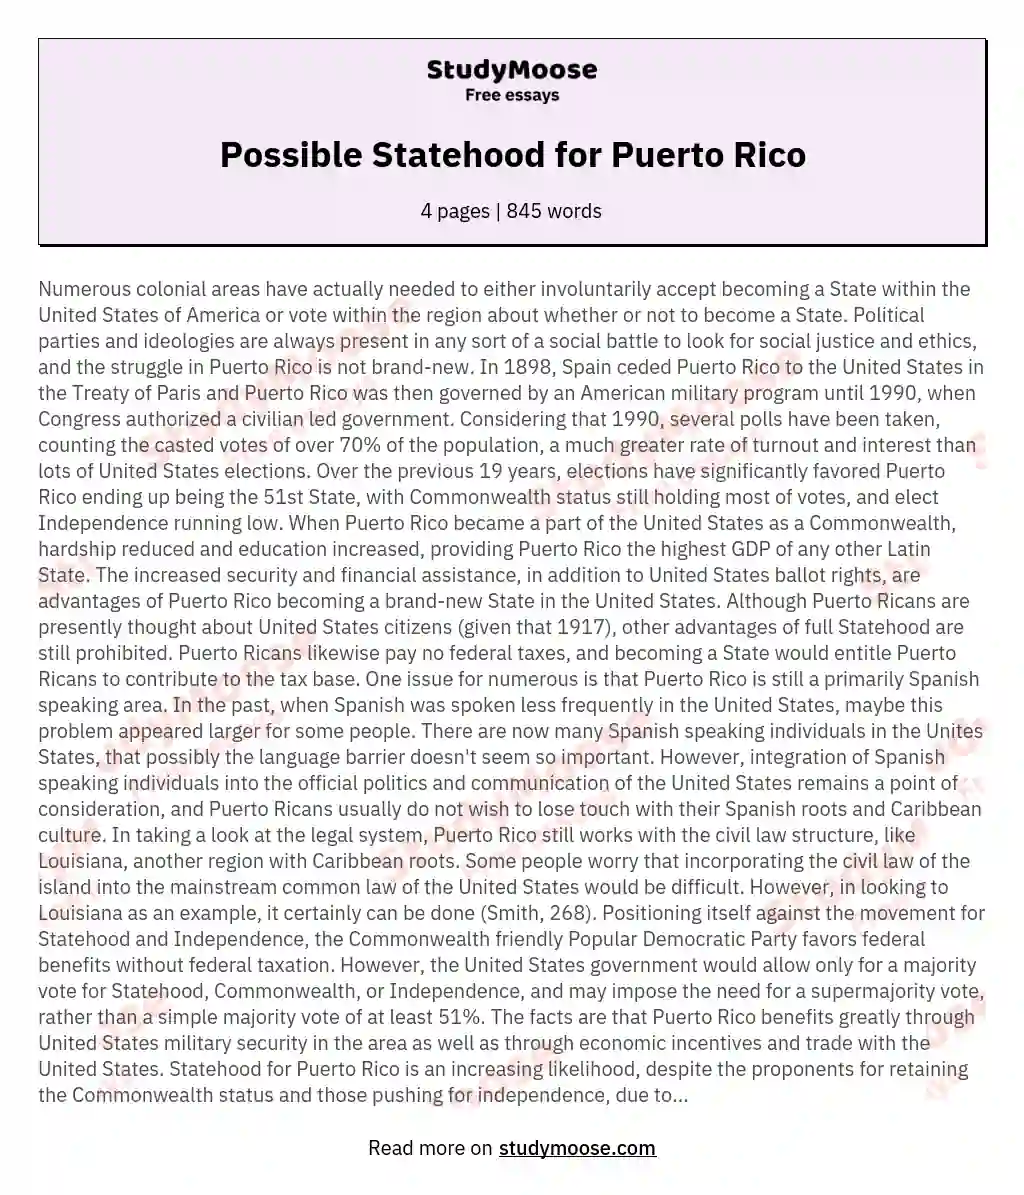 Possible Statehood for Puerto Rico